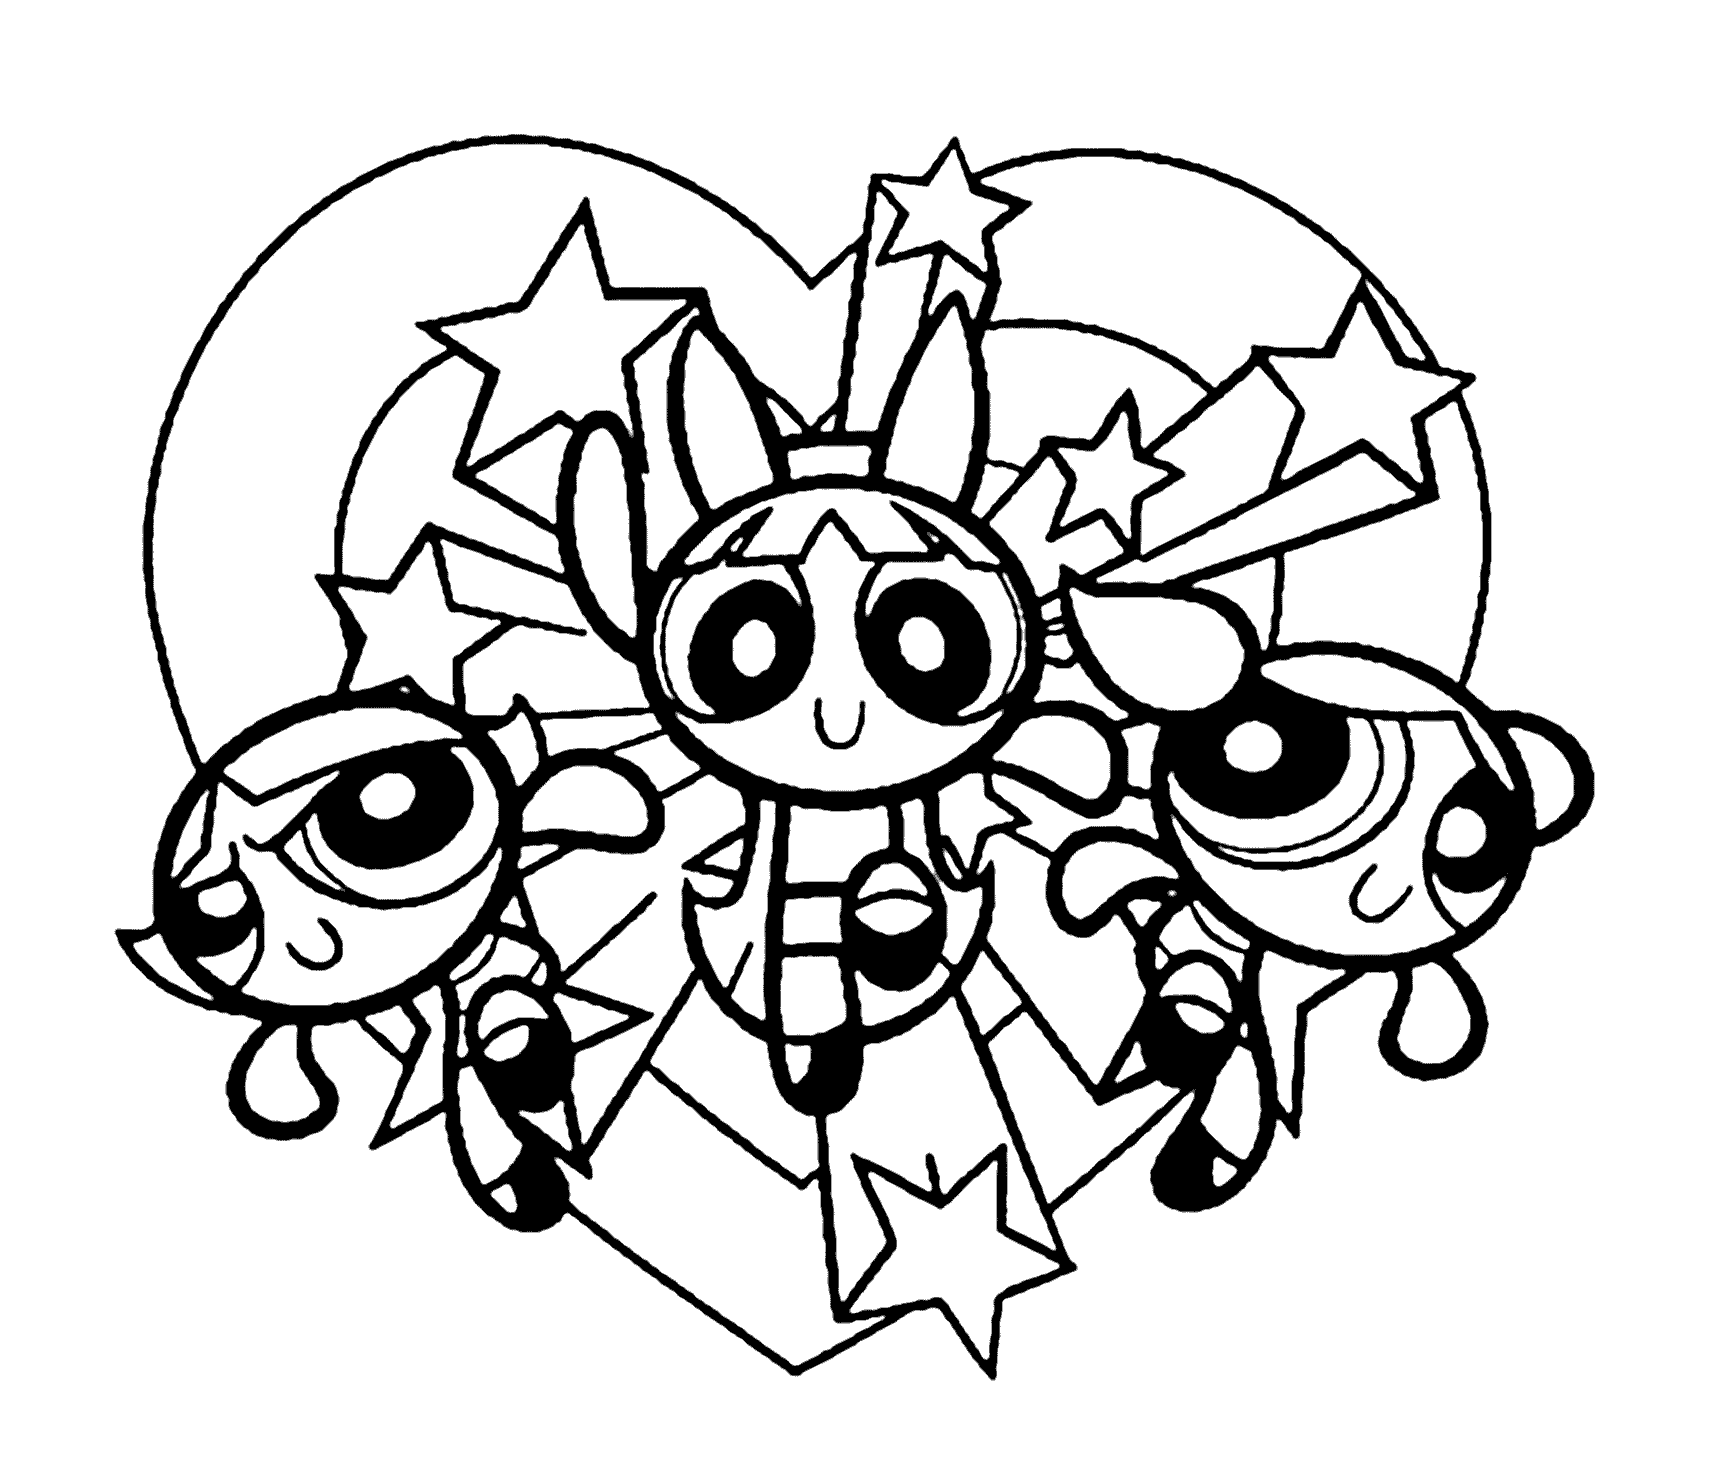 Pudgy Bunny's Power Puff Girl Coloring Pages - Coloring Labs